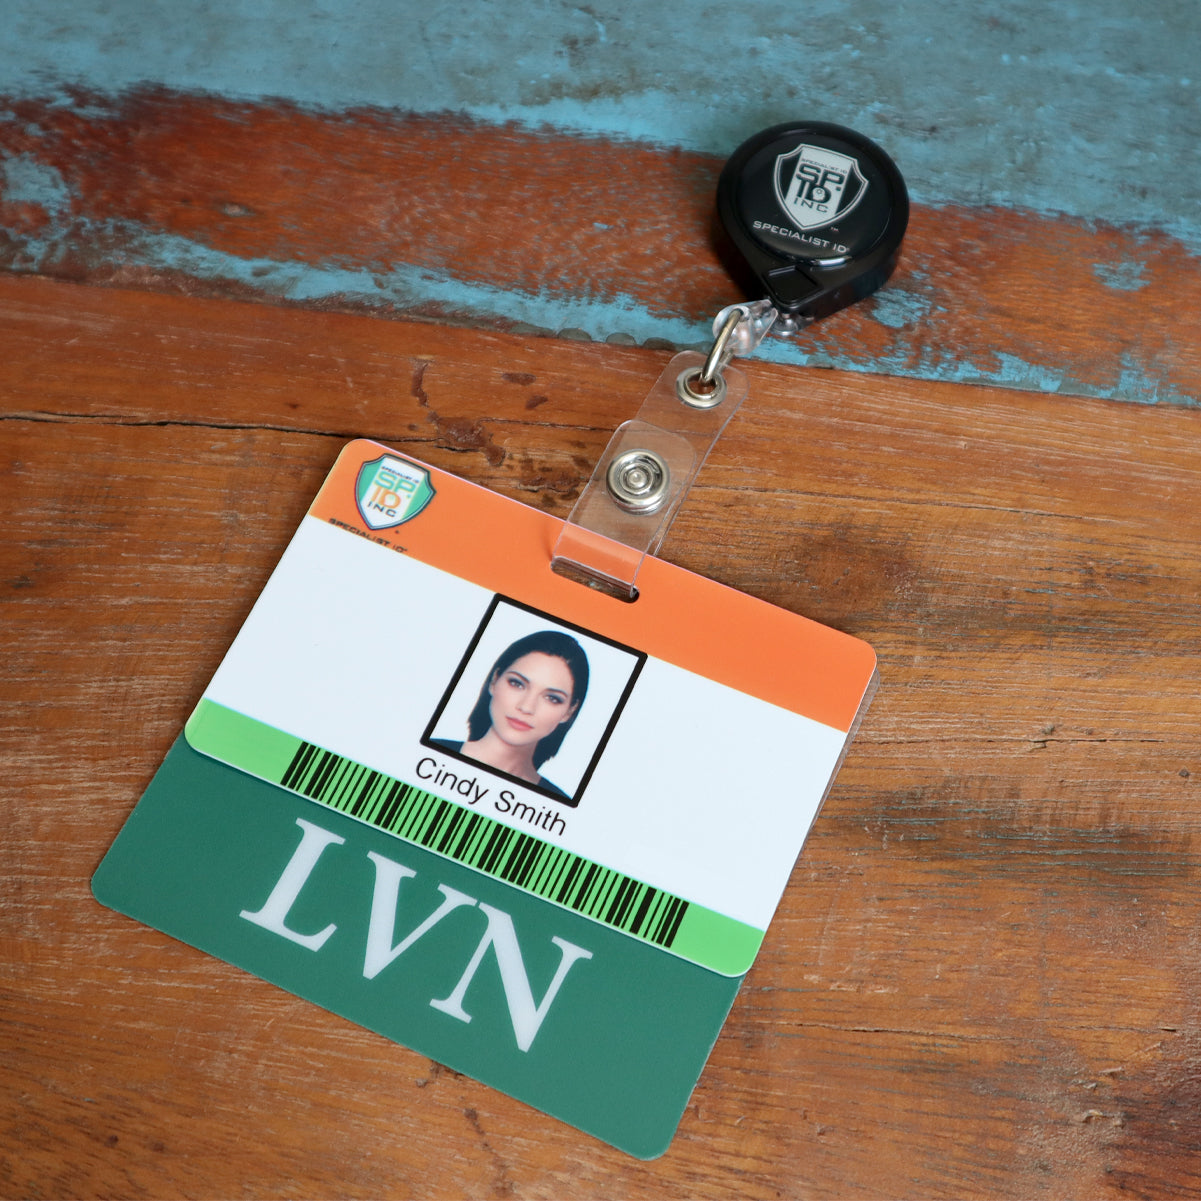 A name badge with a retractable clip shows an ID card labeled "Cindy Smith" and marked "LVN." The card features a photo of a woman and is accompanied by a Clear LVN Badge Buddy - Horizontal ID Badge Backer for Licensed Vocational Nurses - Double Sided Print, set against a wooden and blue background.